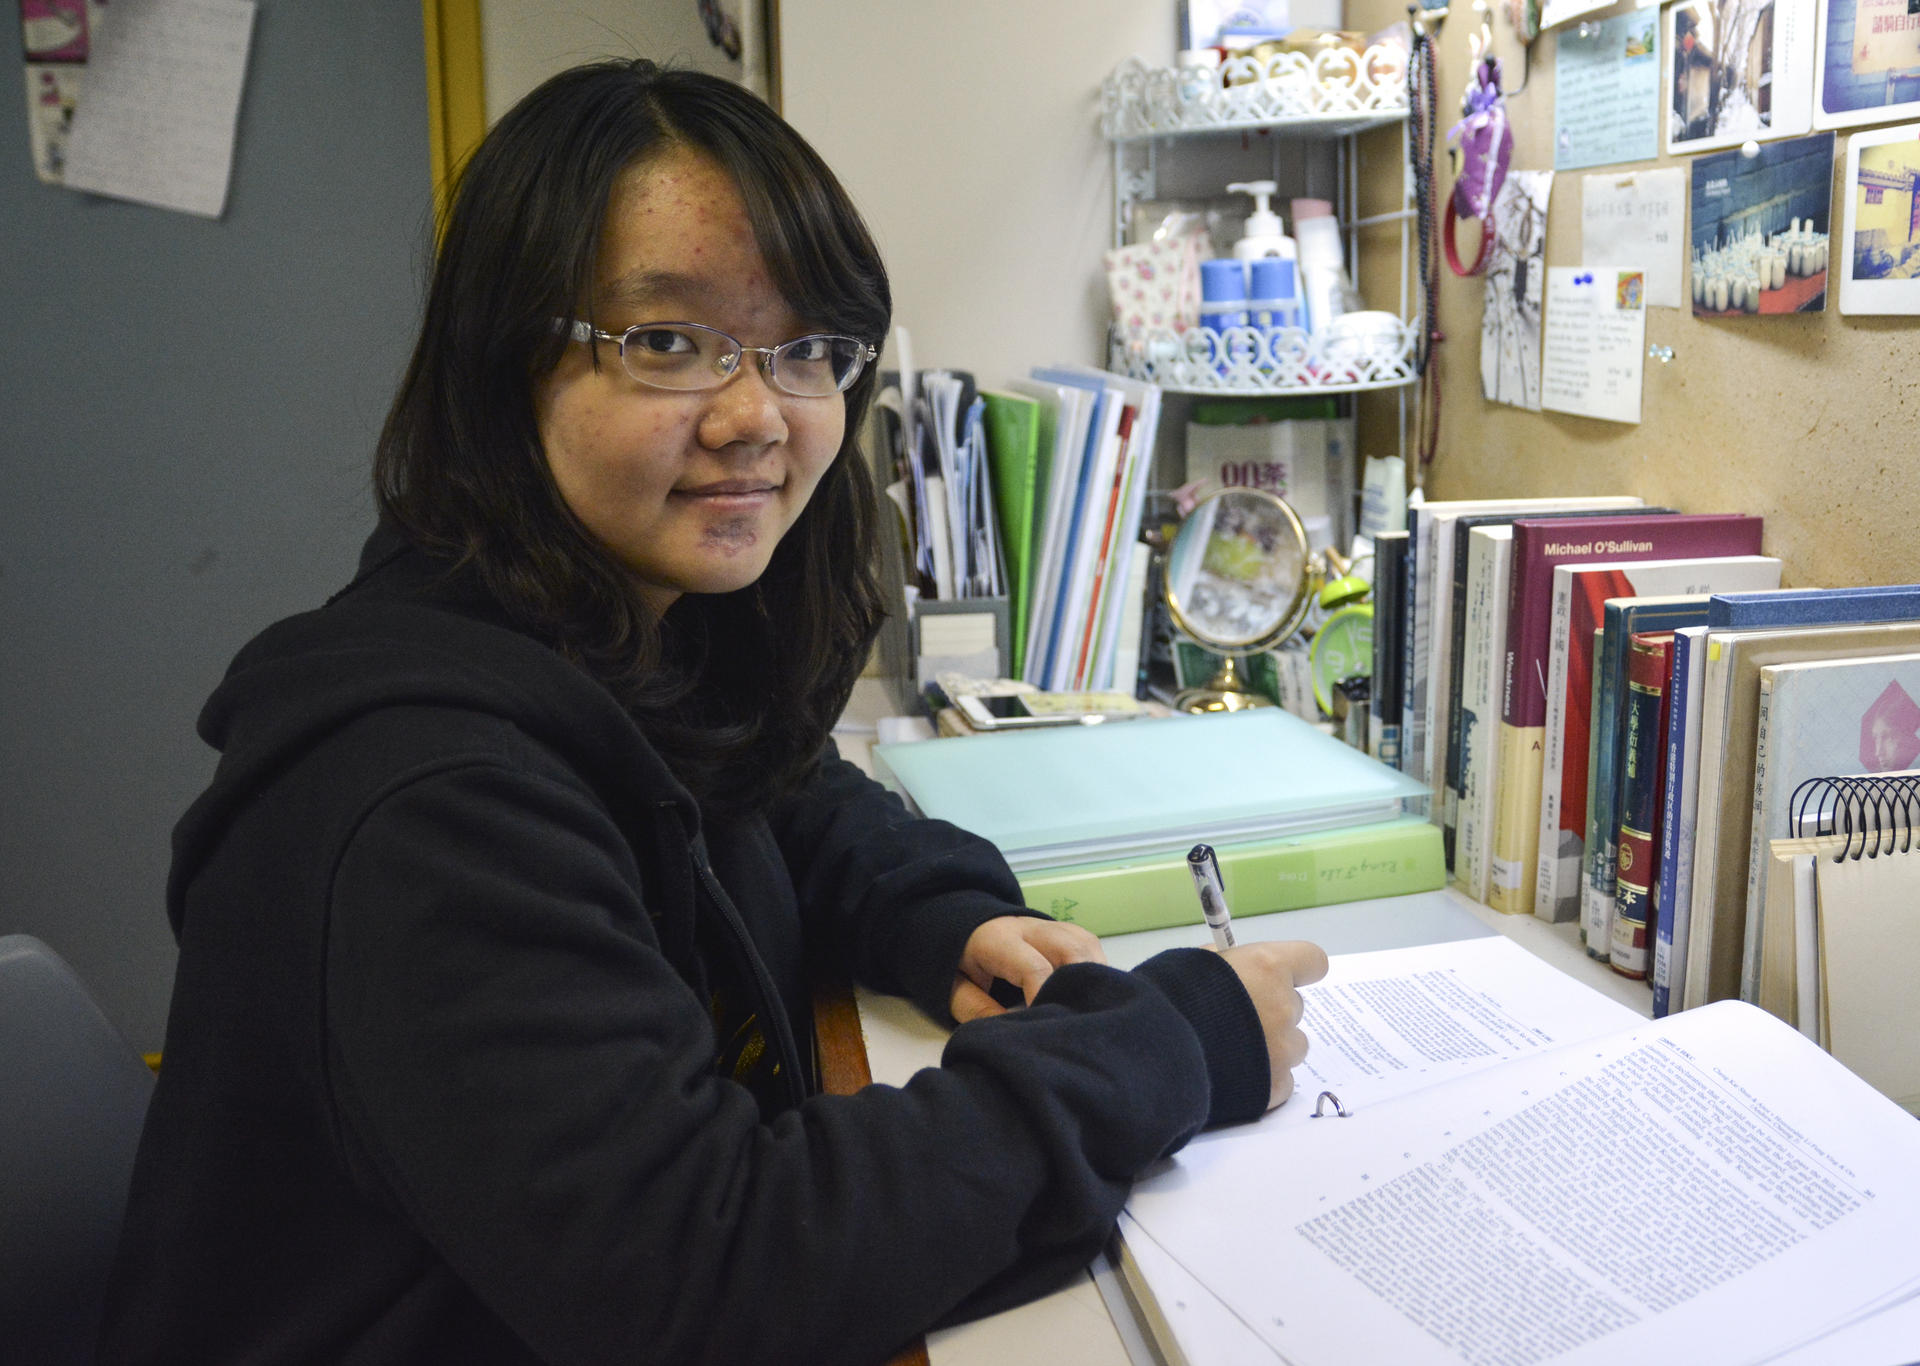 HKU student Wang Yu says the almost mandatory socialising is stressful.